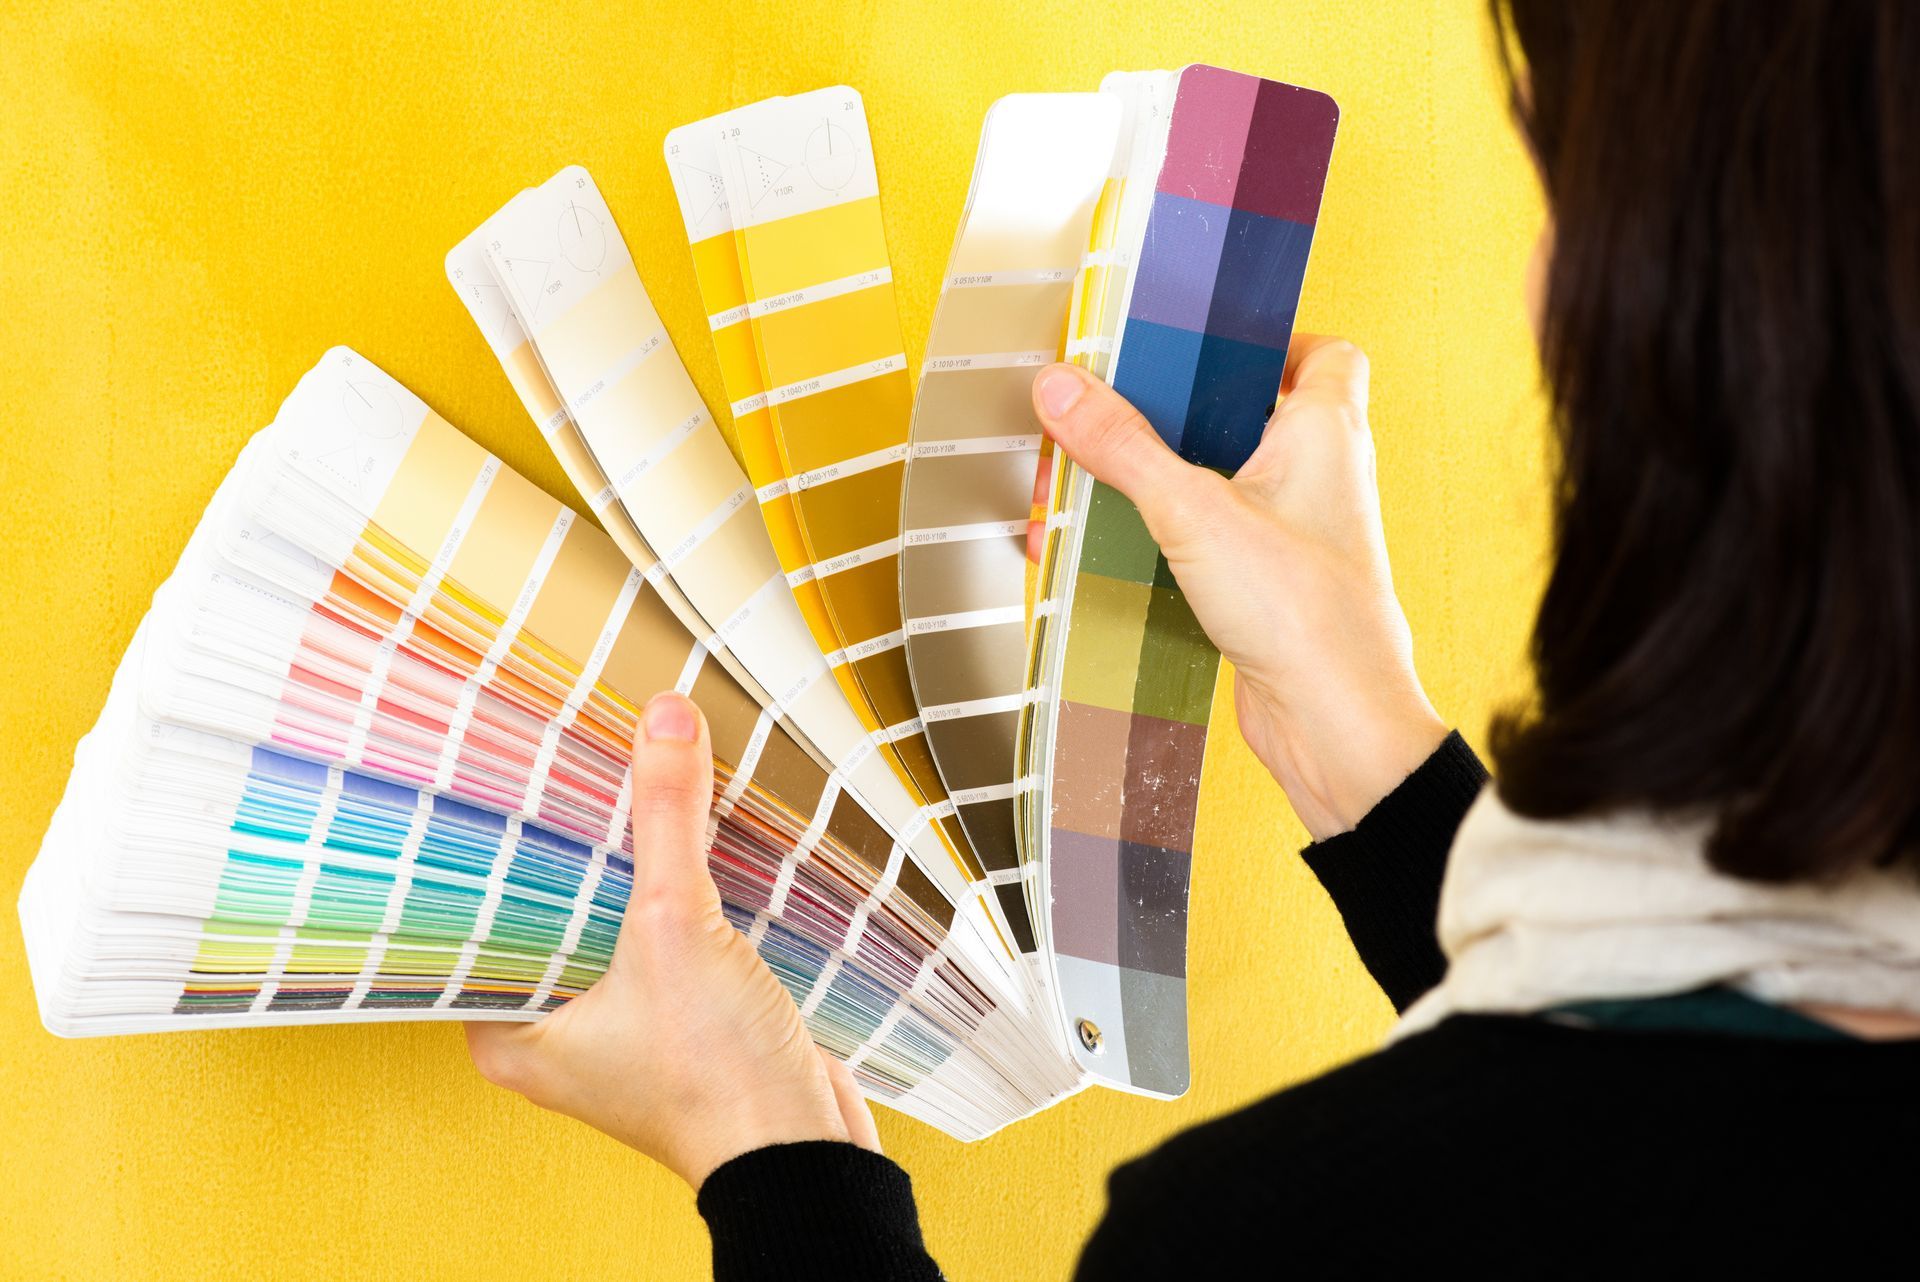 A painter carefully selects a color from a palette, matching it for a wall painting.